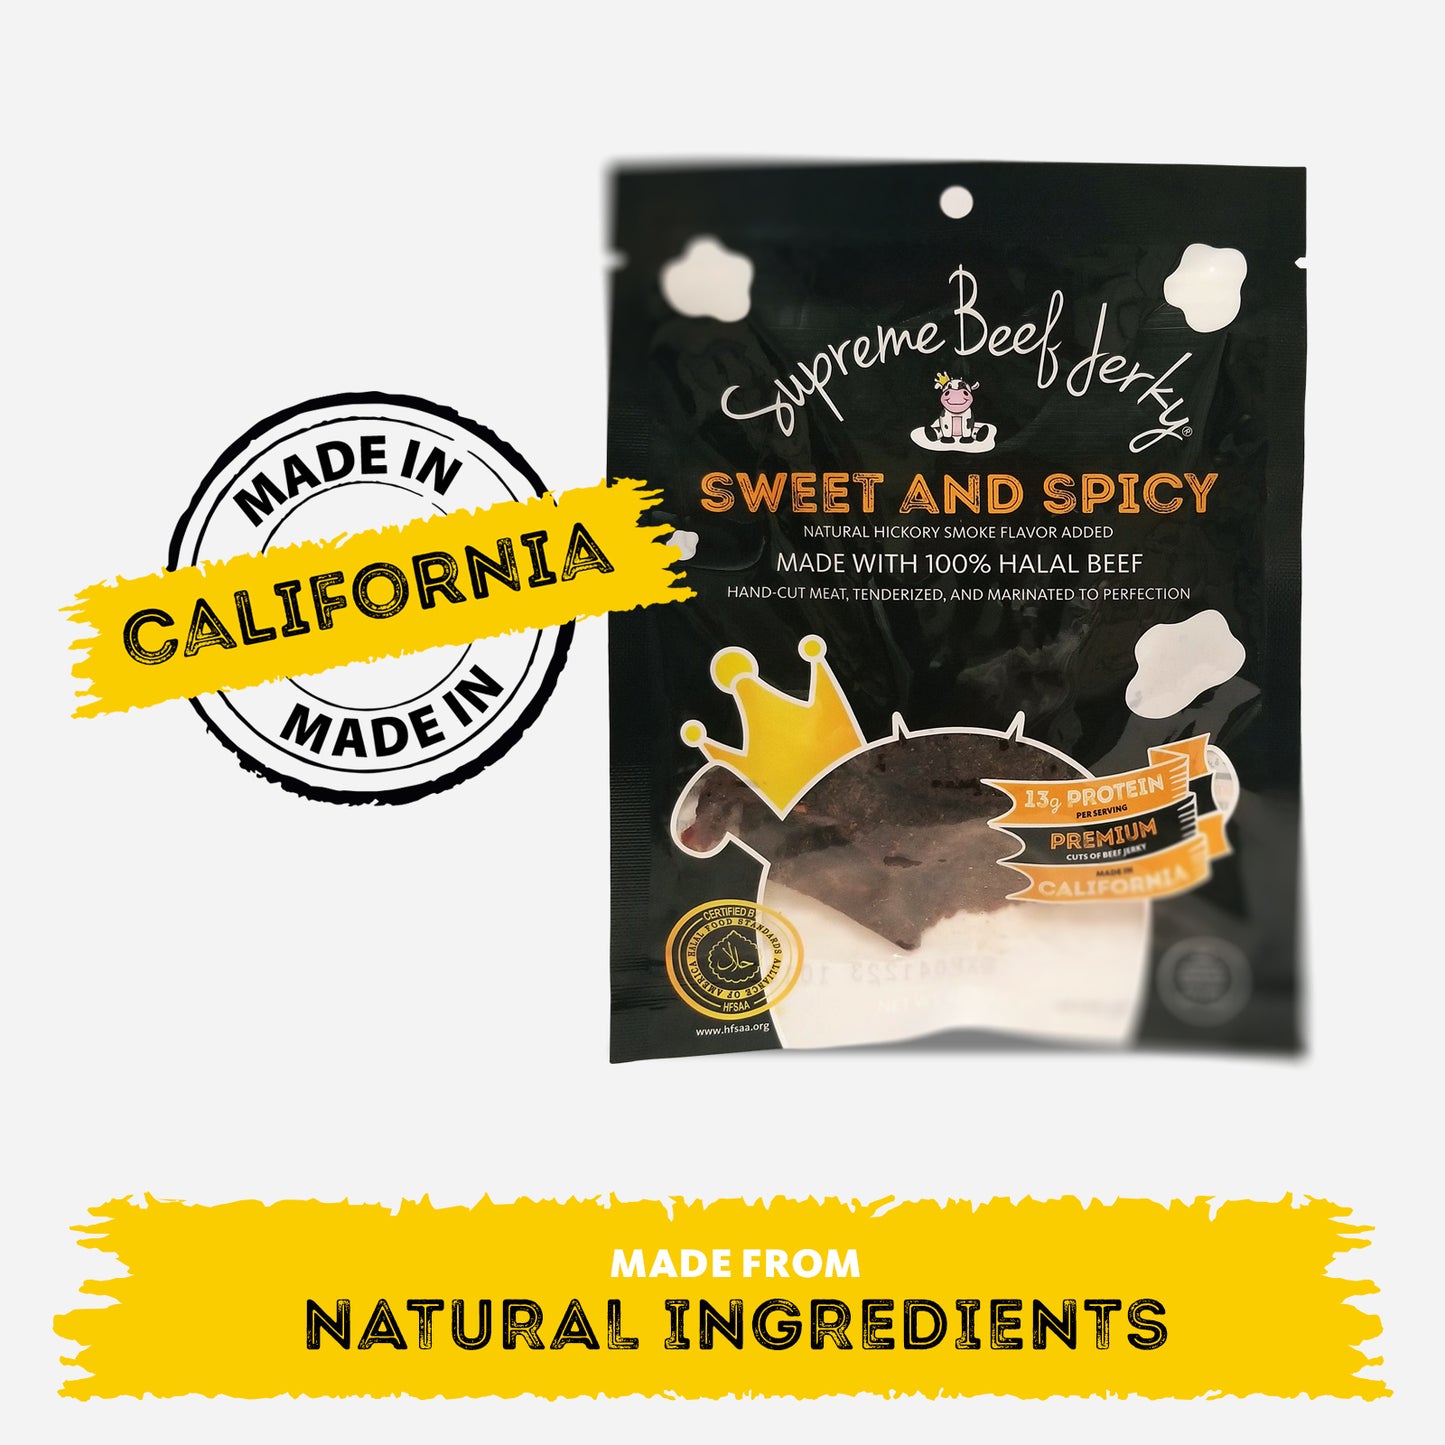 HALAL BEEF JERKY, MARINATED SWEET AND SPICY BEEF JERKY, HANDCRAFTED GOURMET MEAT SNACKS, 2.5 OZ (SWEET AND SPICY)